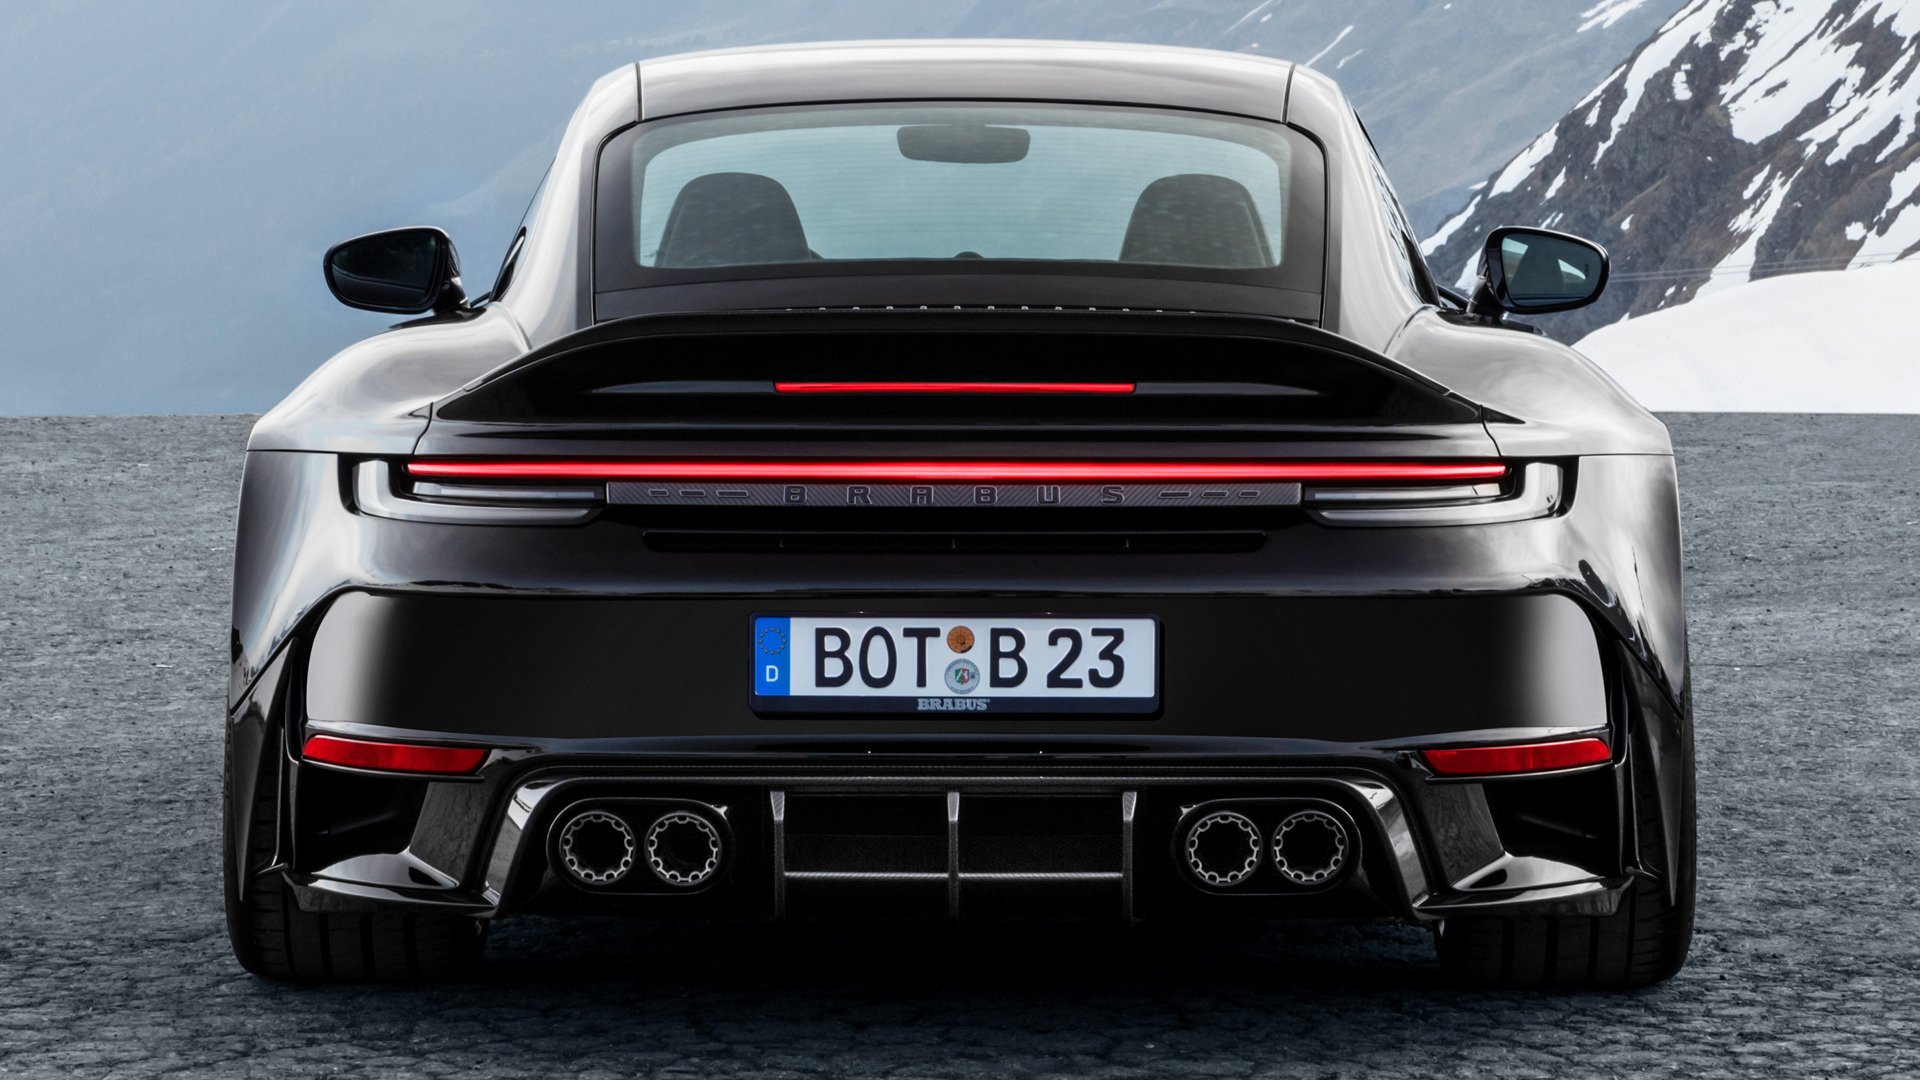 2023 Brabus 900 Rocket R 1 of 25 based on 911 - Wallpapers and HD ...